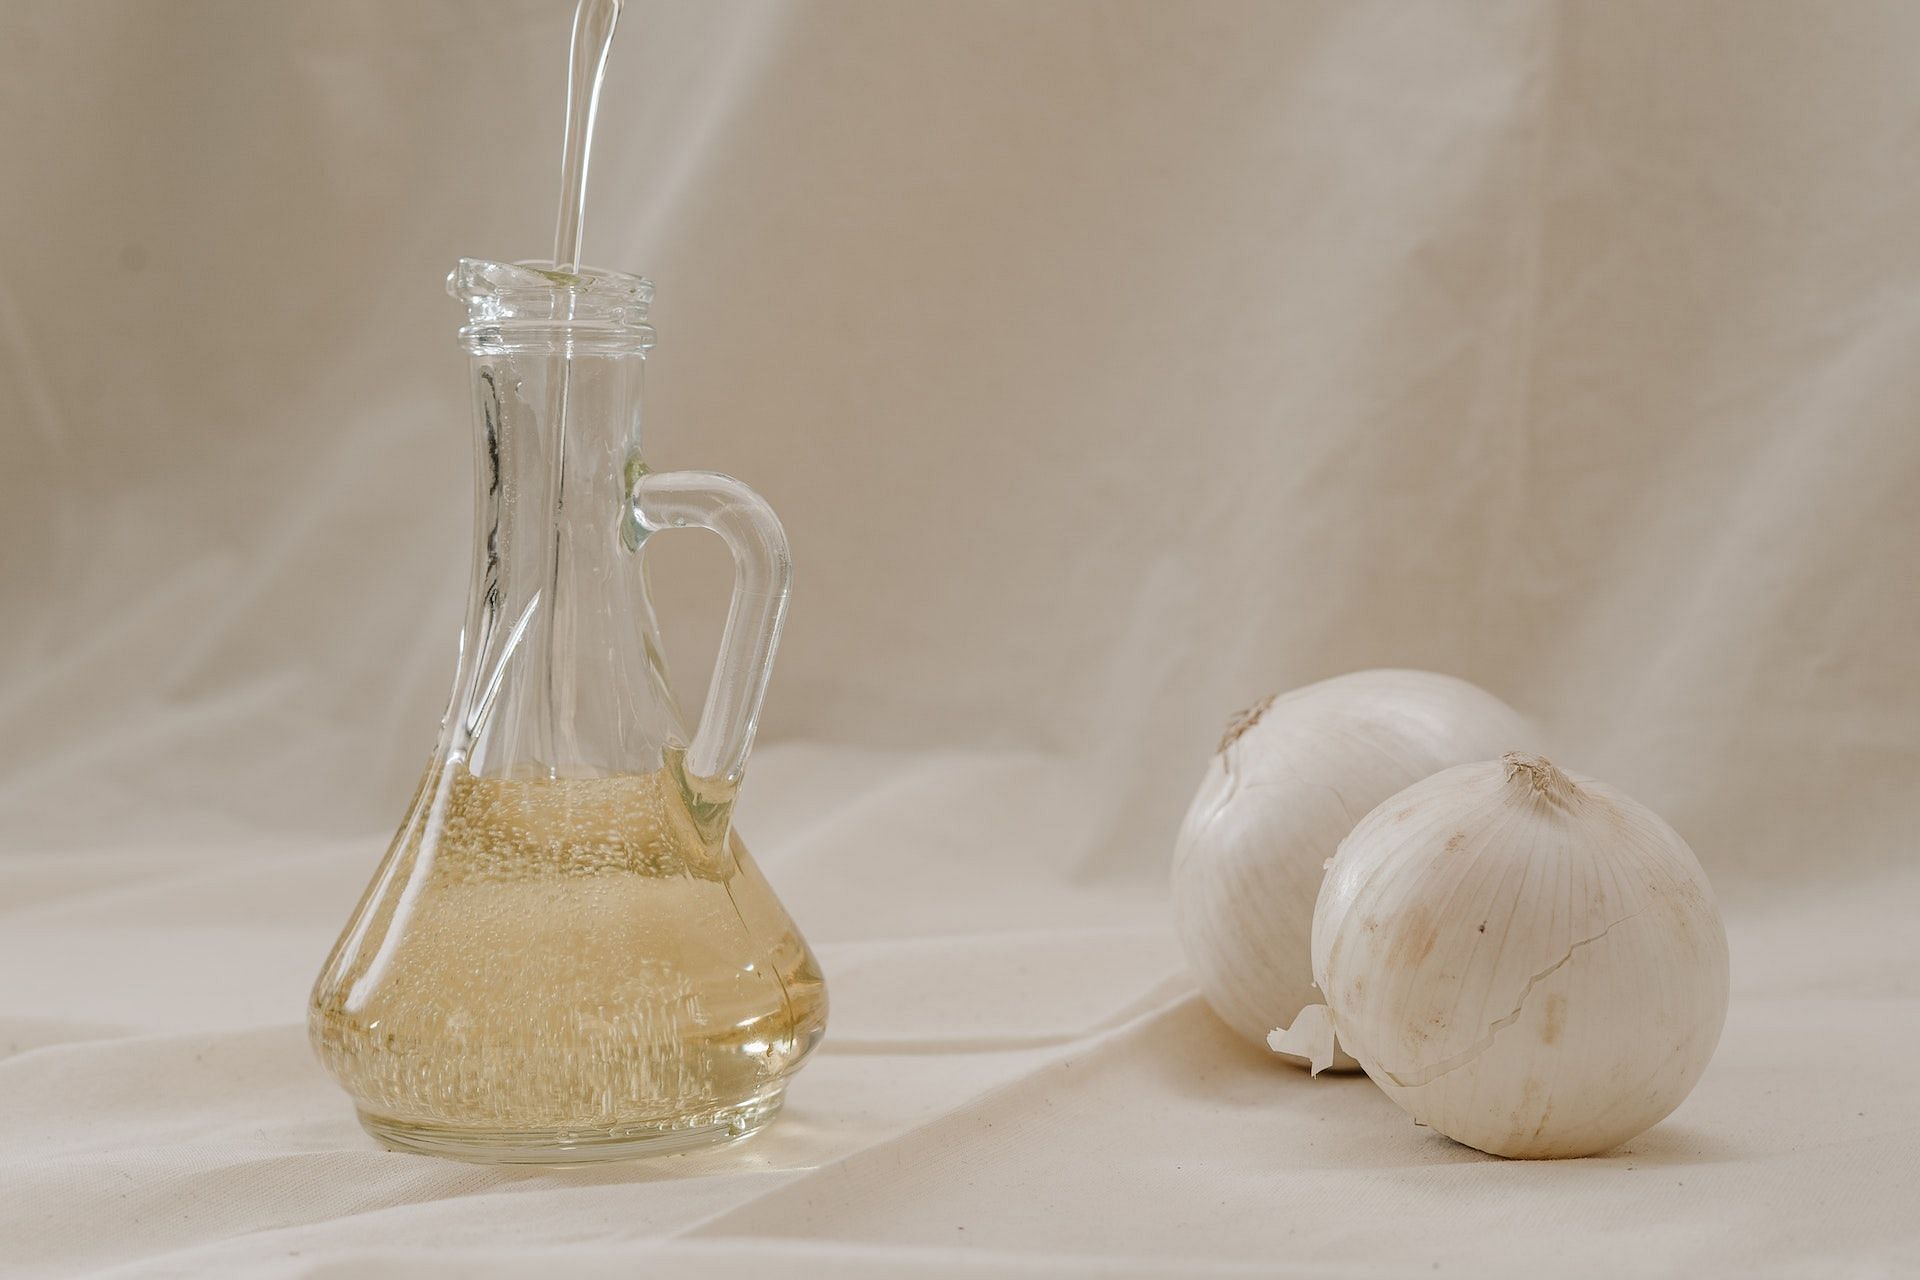 Garlic oil can reduce pain and inflammation. (Photo via Pexels/cottonbro studio)